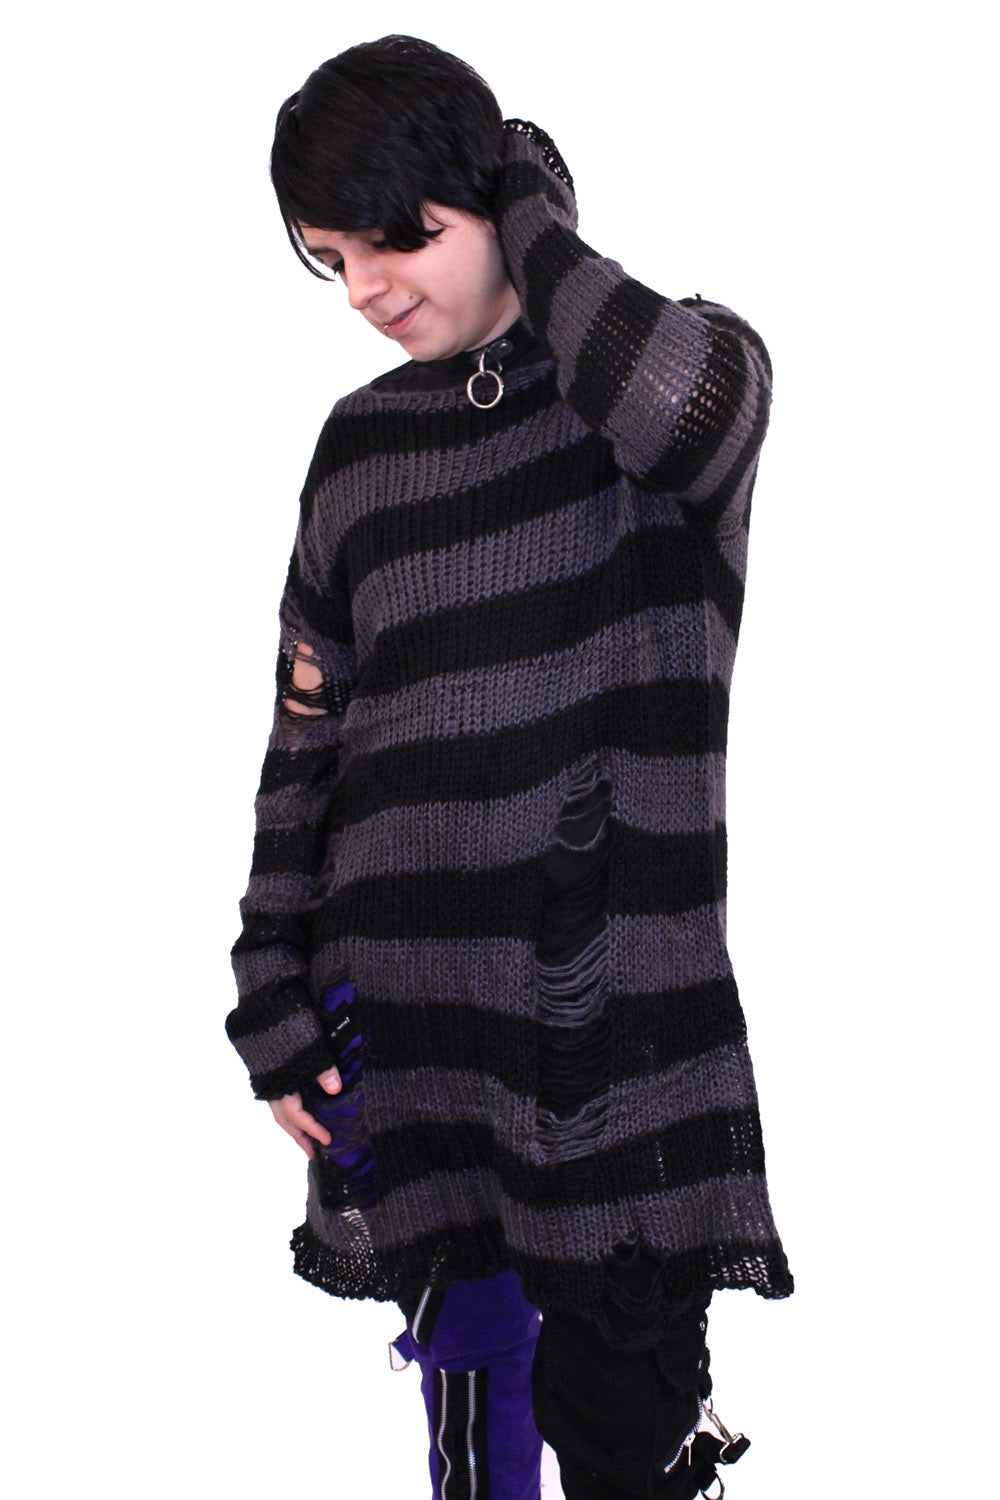 Model wearing an open knit oversized sweater with black and grey stripes and distressed detail at the sleeve and body. Shown from the front